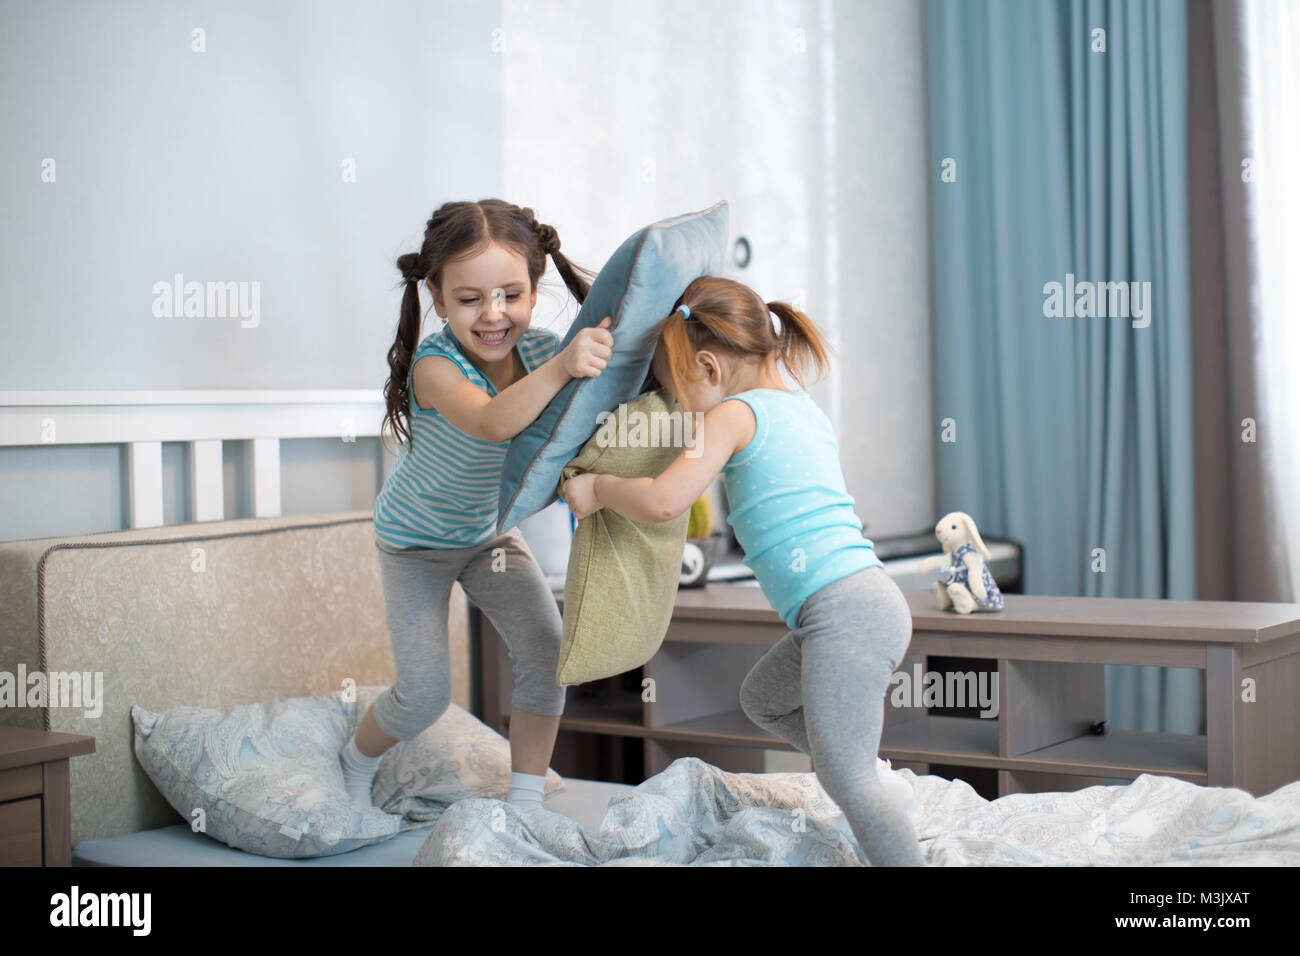 kids girls have fun playing with pillows at home Stock Photo